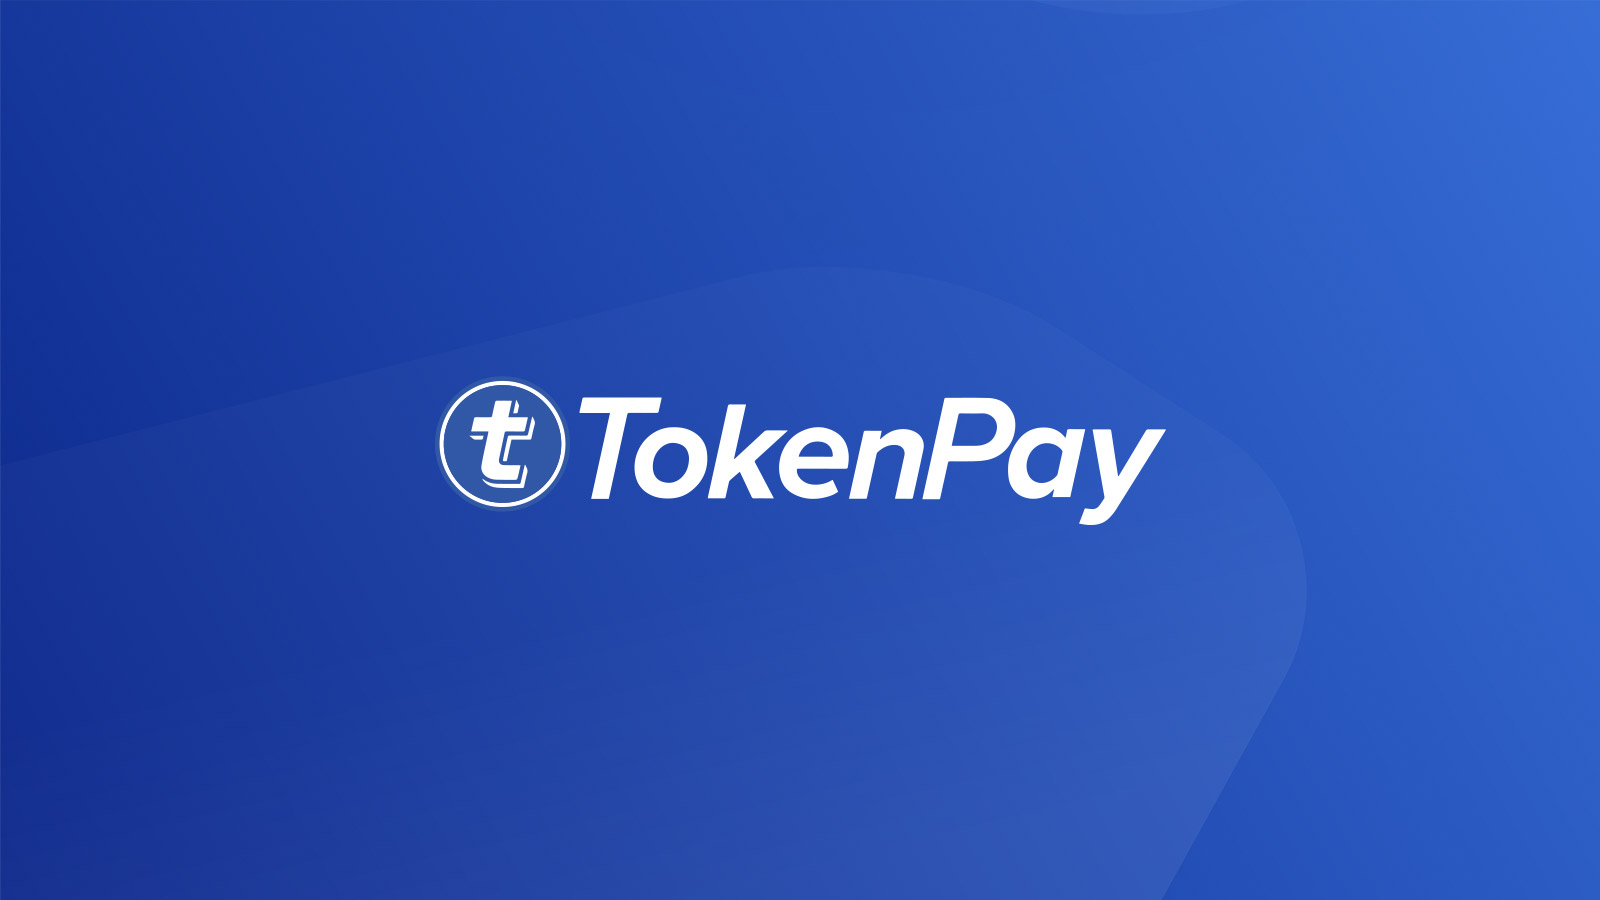 TokenPay (TPAY) Says Bitcoin (BTC) Isnt Even Good For Ordinary Transactions